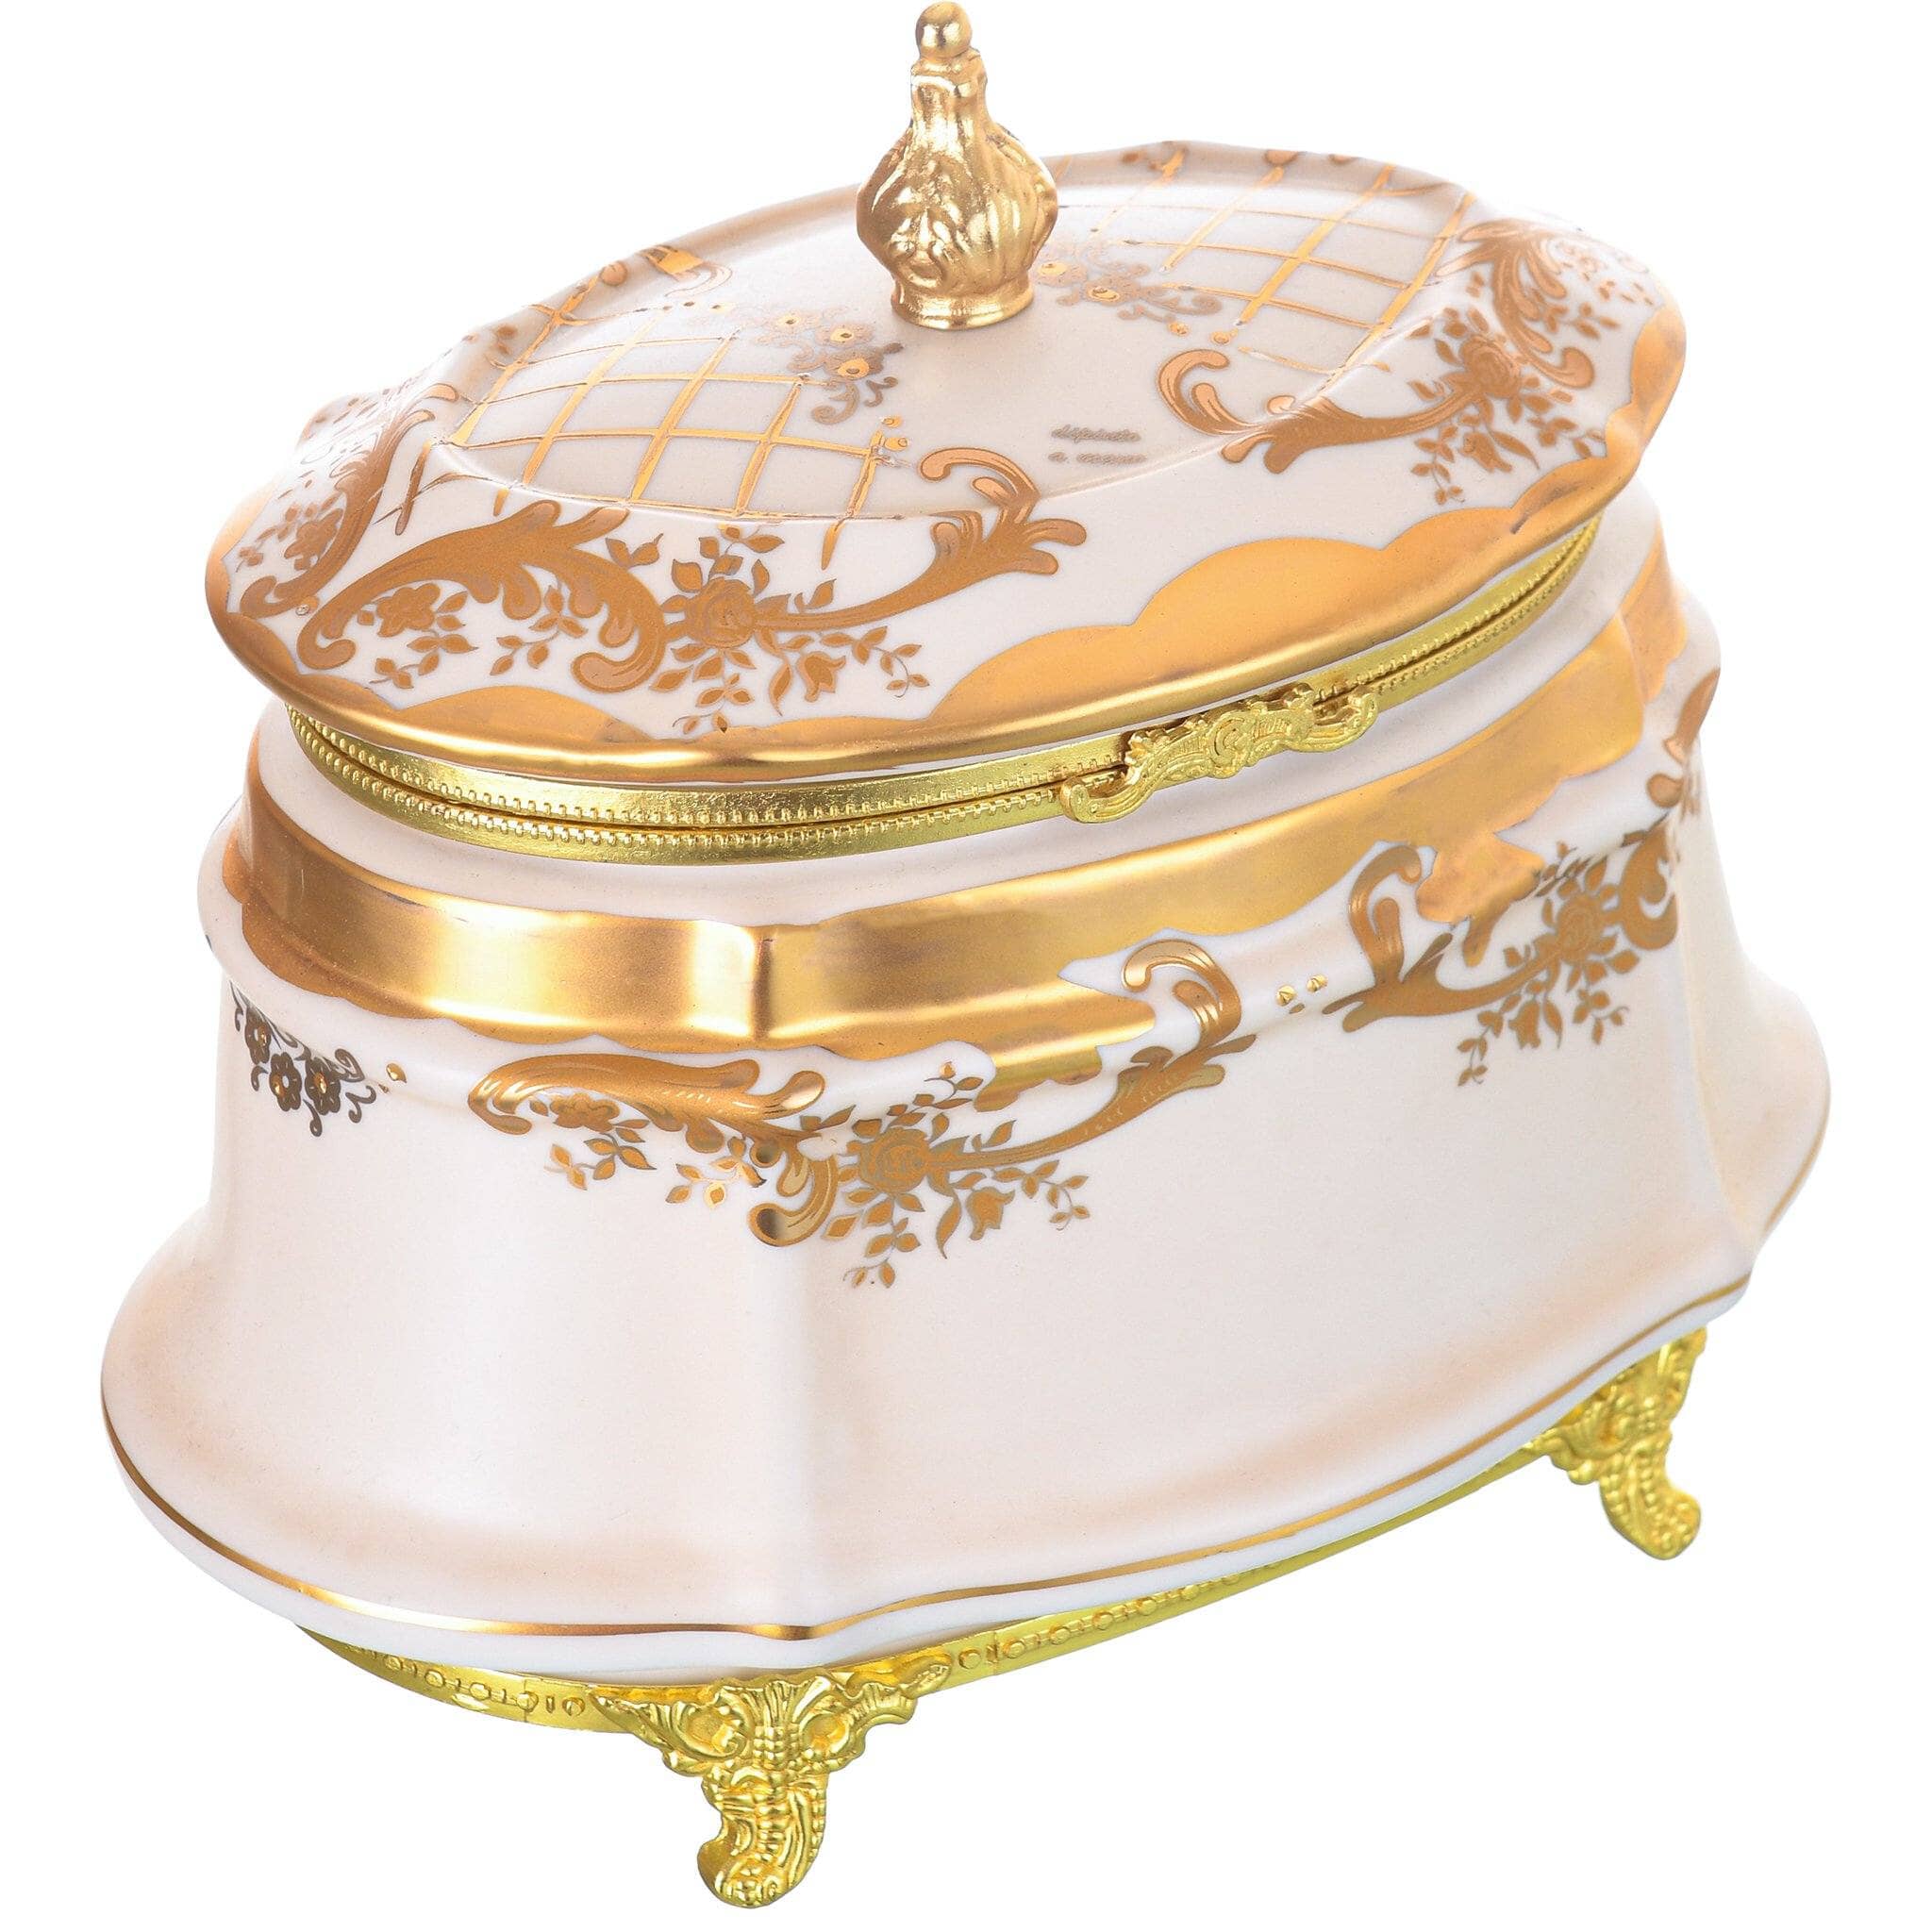 Caroline - Imperial Box with Gold Plated Legs - Beige & Gold - 14x21cm - 58000564